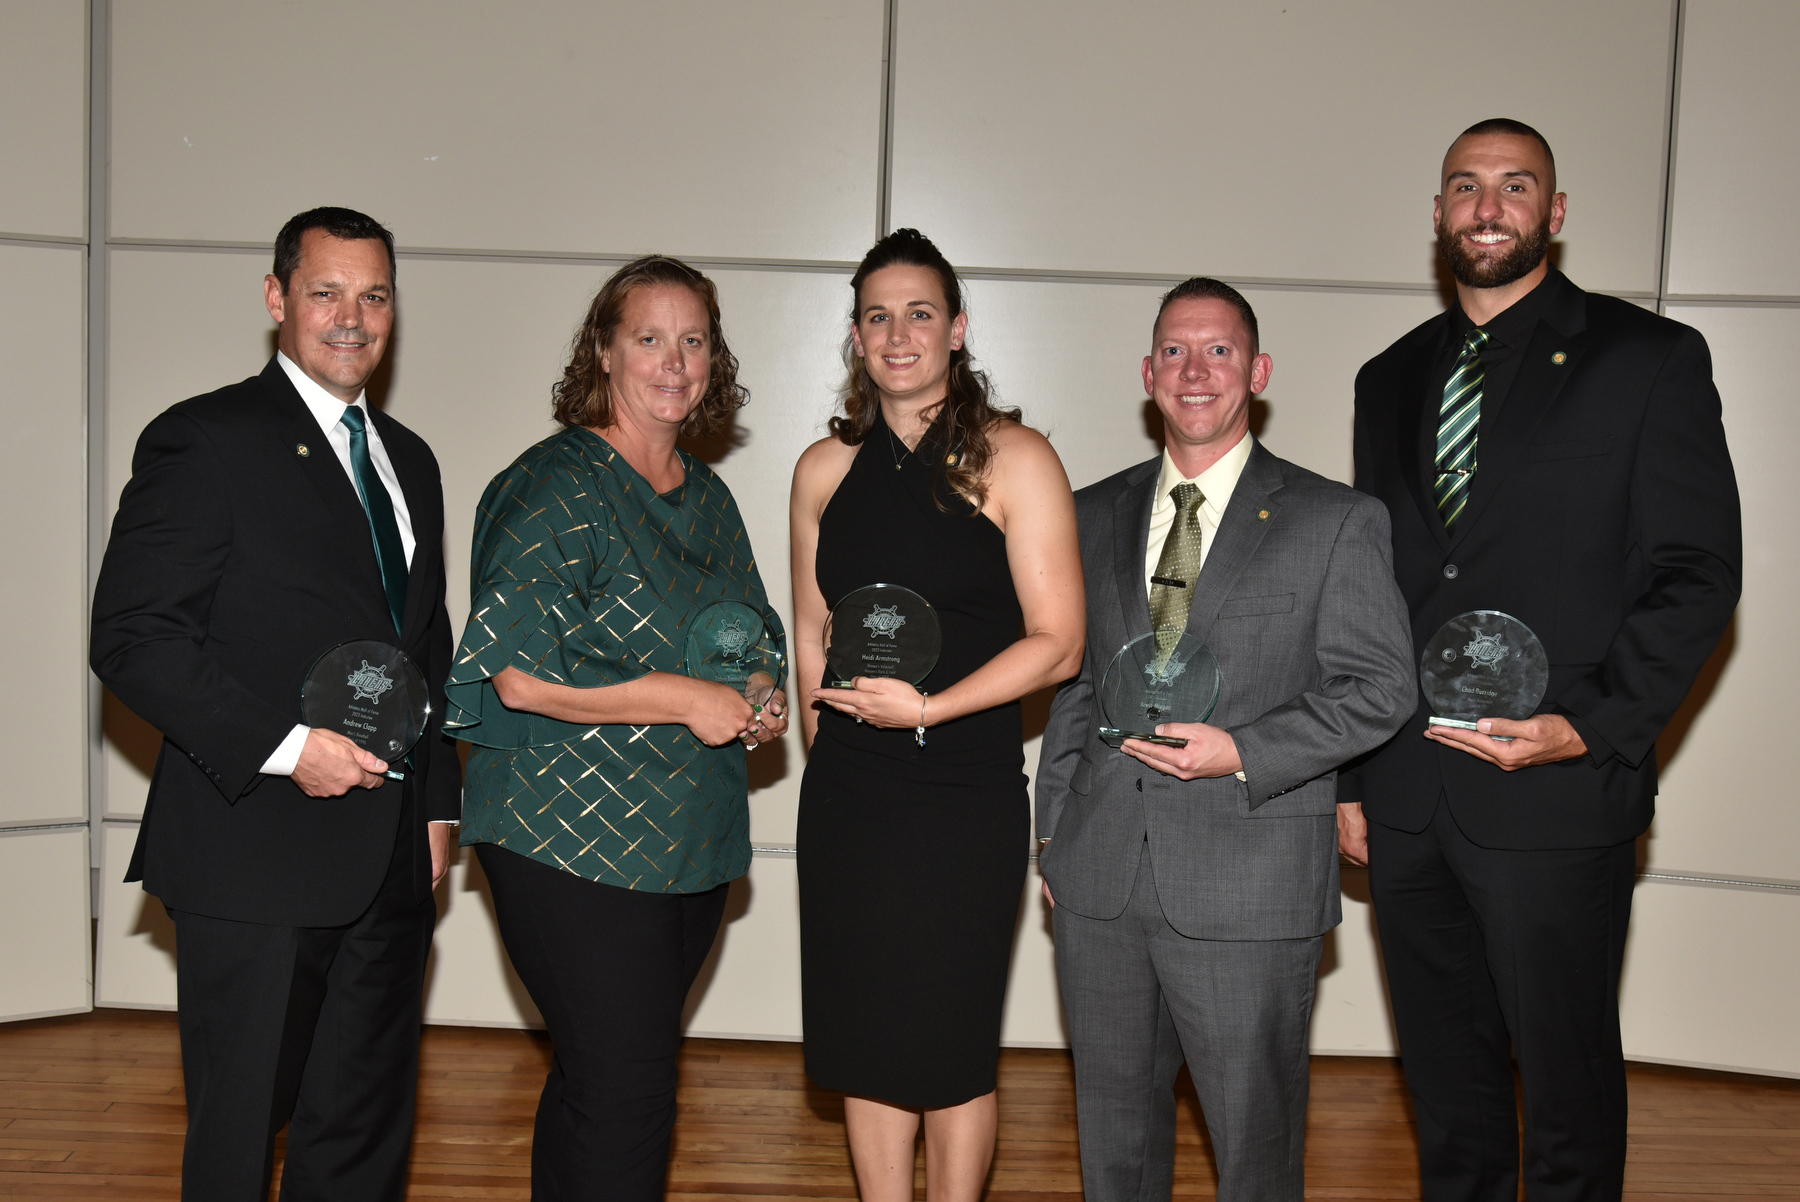 Six Laker alumni officially joined the Oswego State Athletic Hall of Fame at an induction ceremony and dinner Sept. 23 in the Sheldon Hall ballroom. The latest honorees include, from left, are Andrew Clapp ’96, baseball; Robyn Bramoff Mott ’04, basketball and field hockey; Heidi Armstrong ’08, women’s volleyball and track and field; Kevin Morgan ’08, swimming and diving; and Chad Burridge ’12, basketball. Not pictured is inductee Jon Whitelaw ’13 M’18, men’s hockey, who was unable to attend. 